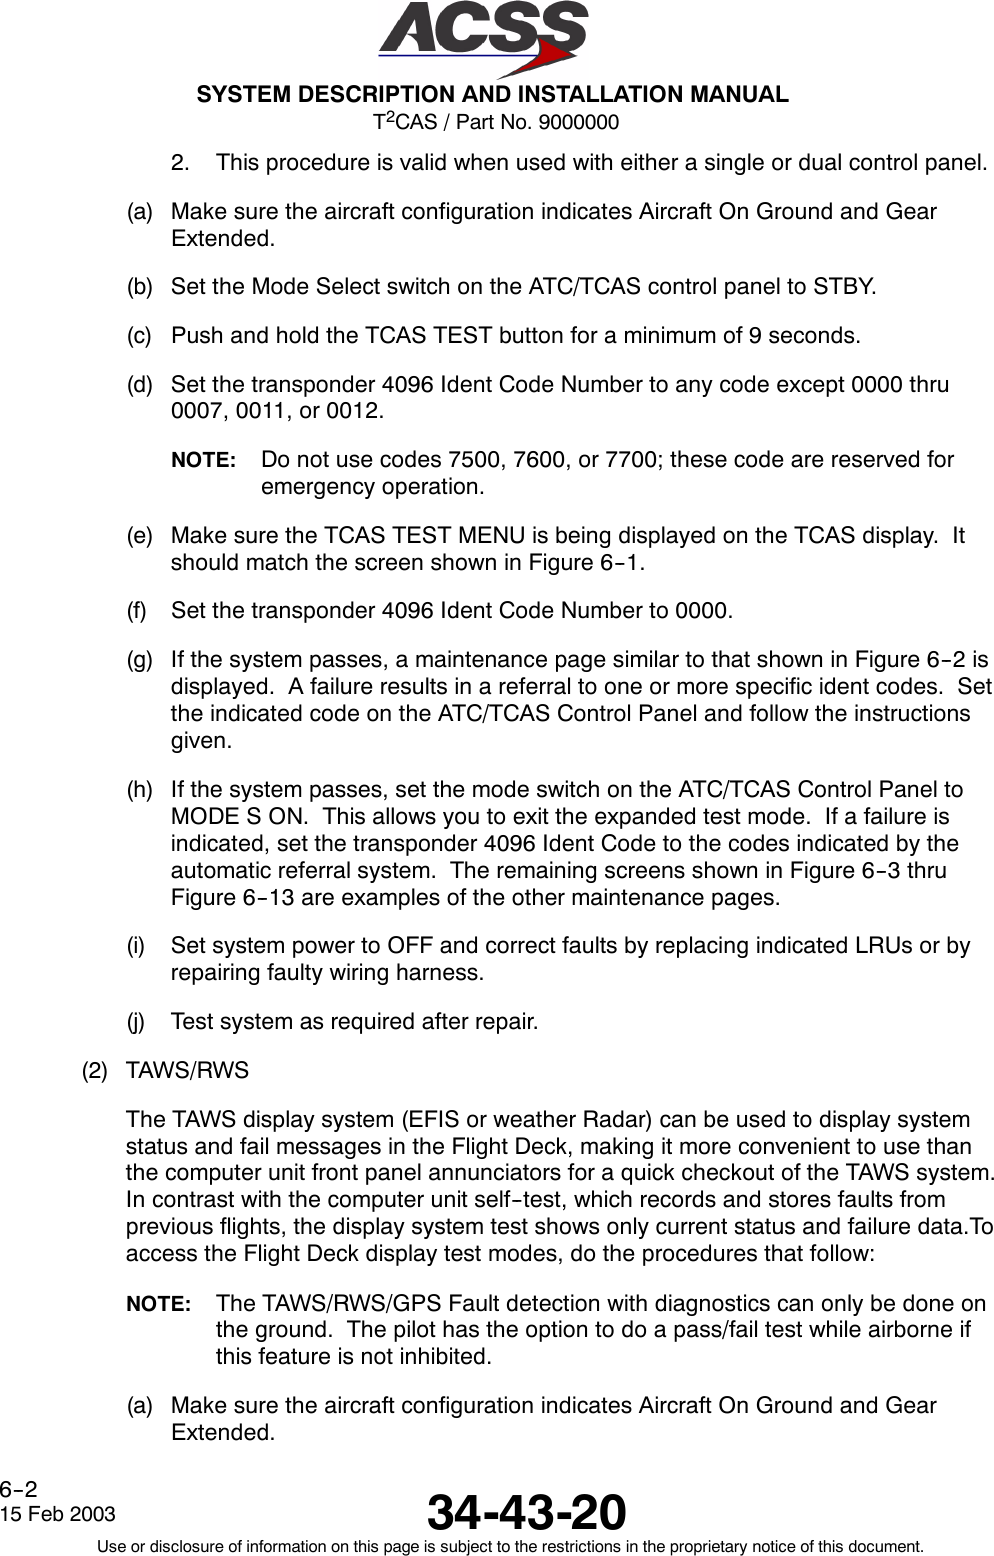 T2CAS / Part No. 9000000SYSTEM DESCRIPTION AND INSTALLATION MANUAL34-43-2015 Feb 2003Use or disclosure of information on this page is subject to the restrictions in the proprietary notice of this document.6--22. This procedure is valid when used with either a single or dual control panel.(a) Make sure the aircraft configuration indicates Aircraft On Ground and GearExtended.(b) Set the Mode Select switch on the ATC/TCAS control panel to STBY.(c) Push and hold the TCAS TEST button for a minimum of 9 seconds.(d) Set the transponder 4096 Ident Code Number to any code except 0000 thru0007, 0011, or 0012.NOTE: Do not use codes 7500, 7600, or 7700; these code are reserved foremergency operation.(e) Make sure the TCAS TEST MENU is being displayed on the TCAS display. Itshould match the screen shown in Figure 6--1.(f) Set the transponder 4096 Ident Code Number to 0000.(g) If the system passes, a maintenance page similar to that shown in Figure 6--2 isdisplayed. A failure results in a referral to one or more specific ident codes. Setthe indicated code on the ATC/TCAS Control Panel and follow the instructionsgiven.(h) If the system passes, set the mode switch on the ATC/TCAS Control Panel toMODE S ON. This allows you to exit the expanded test mode. If a failure isindicated, set the transponder 4096 Ident Code to the codes indicated by theautomatic referral system. The remaining screens shown in Figure 6--3 thruFigure 6--13 are examples of the other maintenance pages.(i) Set system power to OFF and correct faults by replacing indicated LRUs or byrepairing faulty wiring harness.(j) Test system as required after repair.(2) TAWS/RWSThe TAWS display system (EFIS or weather Radar) can be used to display systemstatus and fail messages in the Flight Deck, making it more convenient to use thanthe computer unit front panel annunciators for a quick checkout of the TAWS system.In contrast with the computer unit self--test, which records and stores faults fromprevious flights, the display system test shows only current status and failure data.Toaccess the Flight Deck display test modes, do the procedures that follow:NOTE: The TAWS/RWS/GPS Fault detection with diagnostics can only be done onthe ground. The pilot has the option to do a pass/fail test while airborne ifthis feature is not inhibited.(a) Make sure the aircraft configuration indicates Aircraft On Ground and GearExtended.